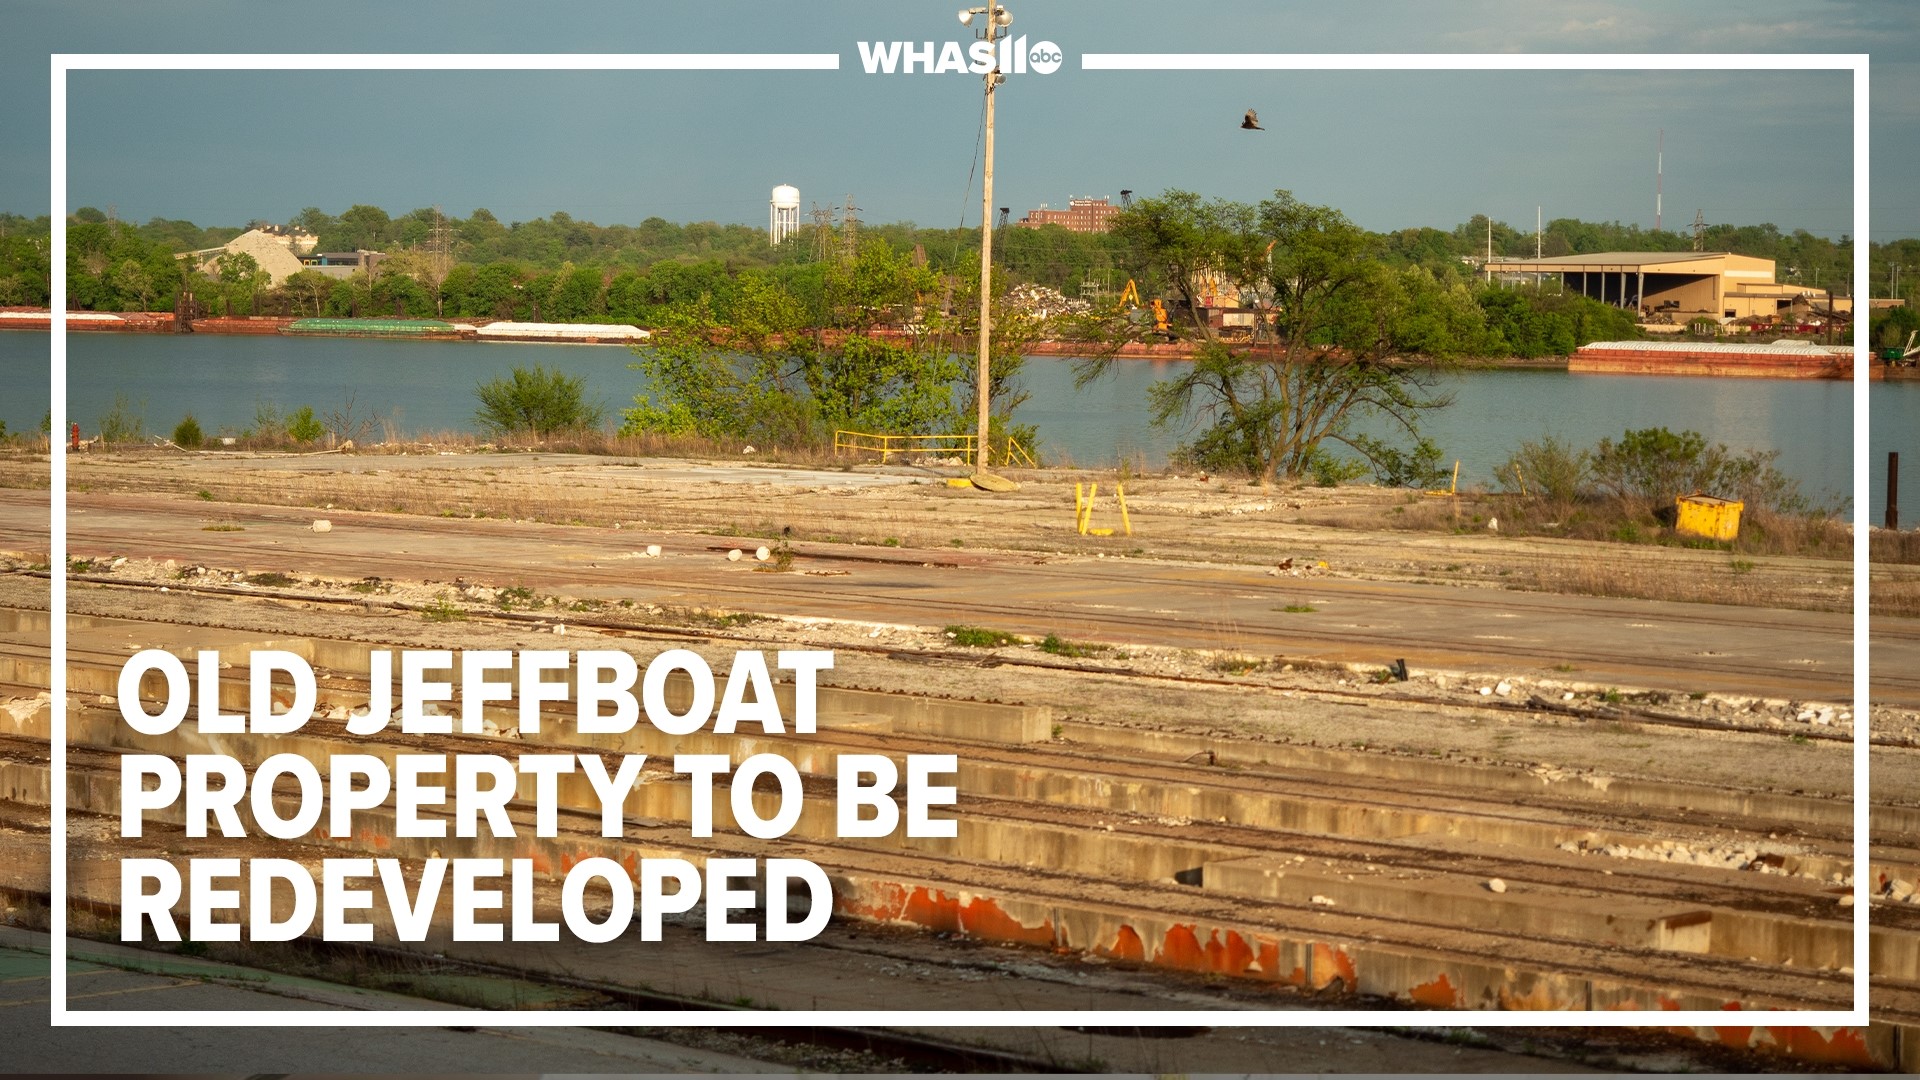 The city partnered with the American Commercial Barge Line to bring life back to the site.